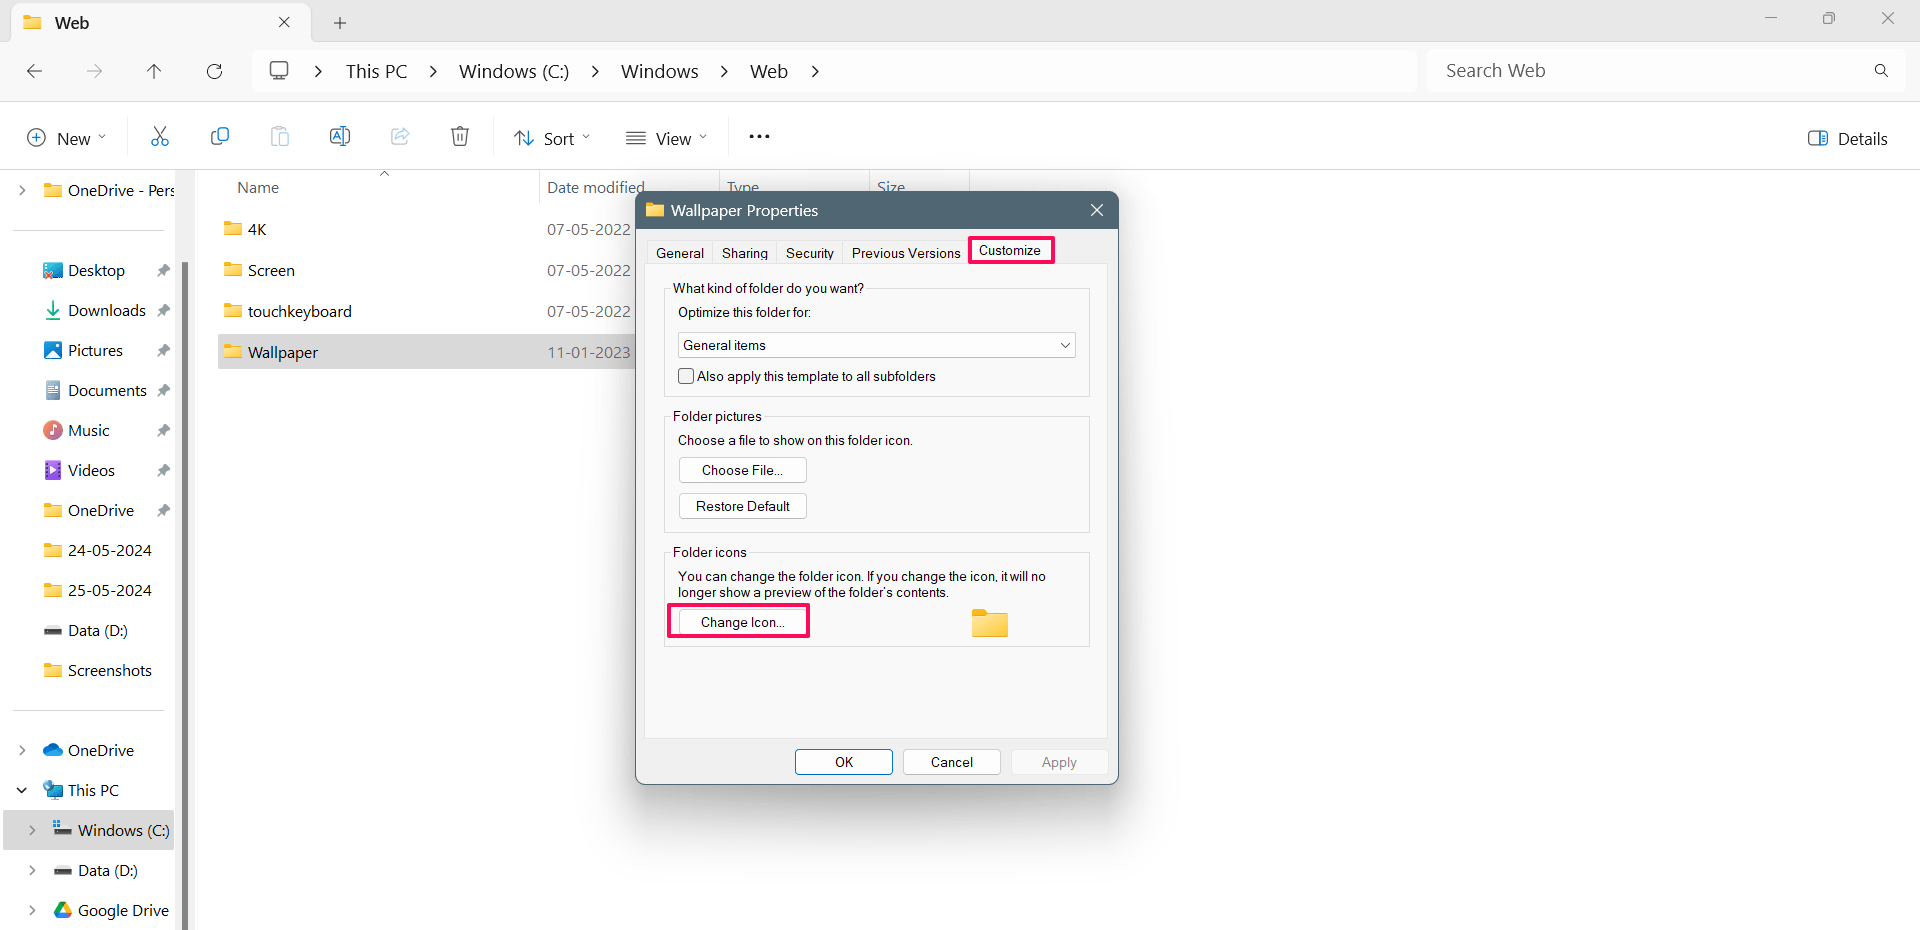 Click the Customize tab and choose Change Icon